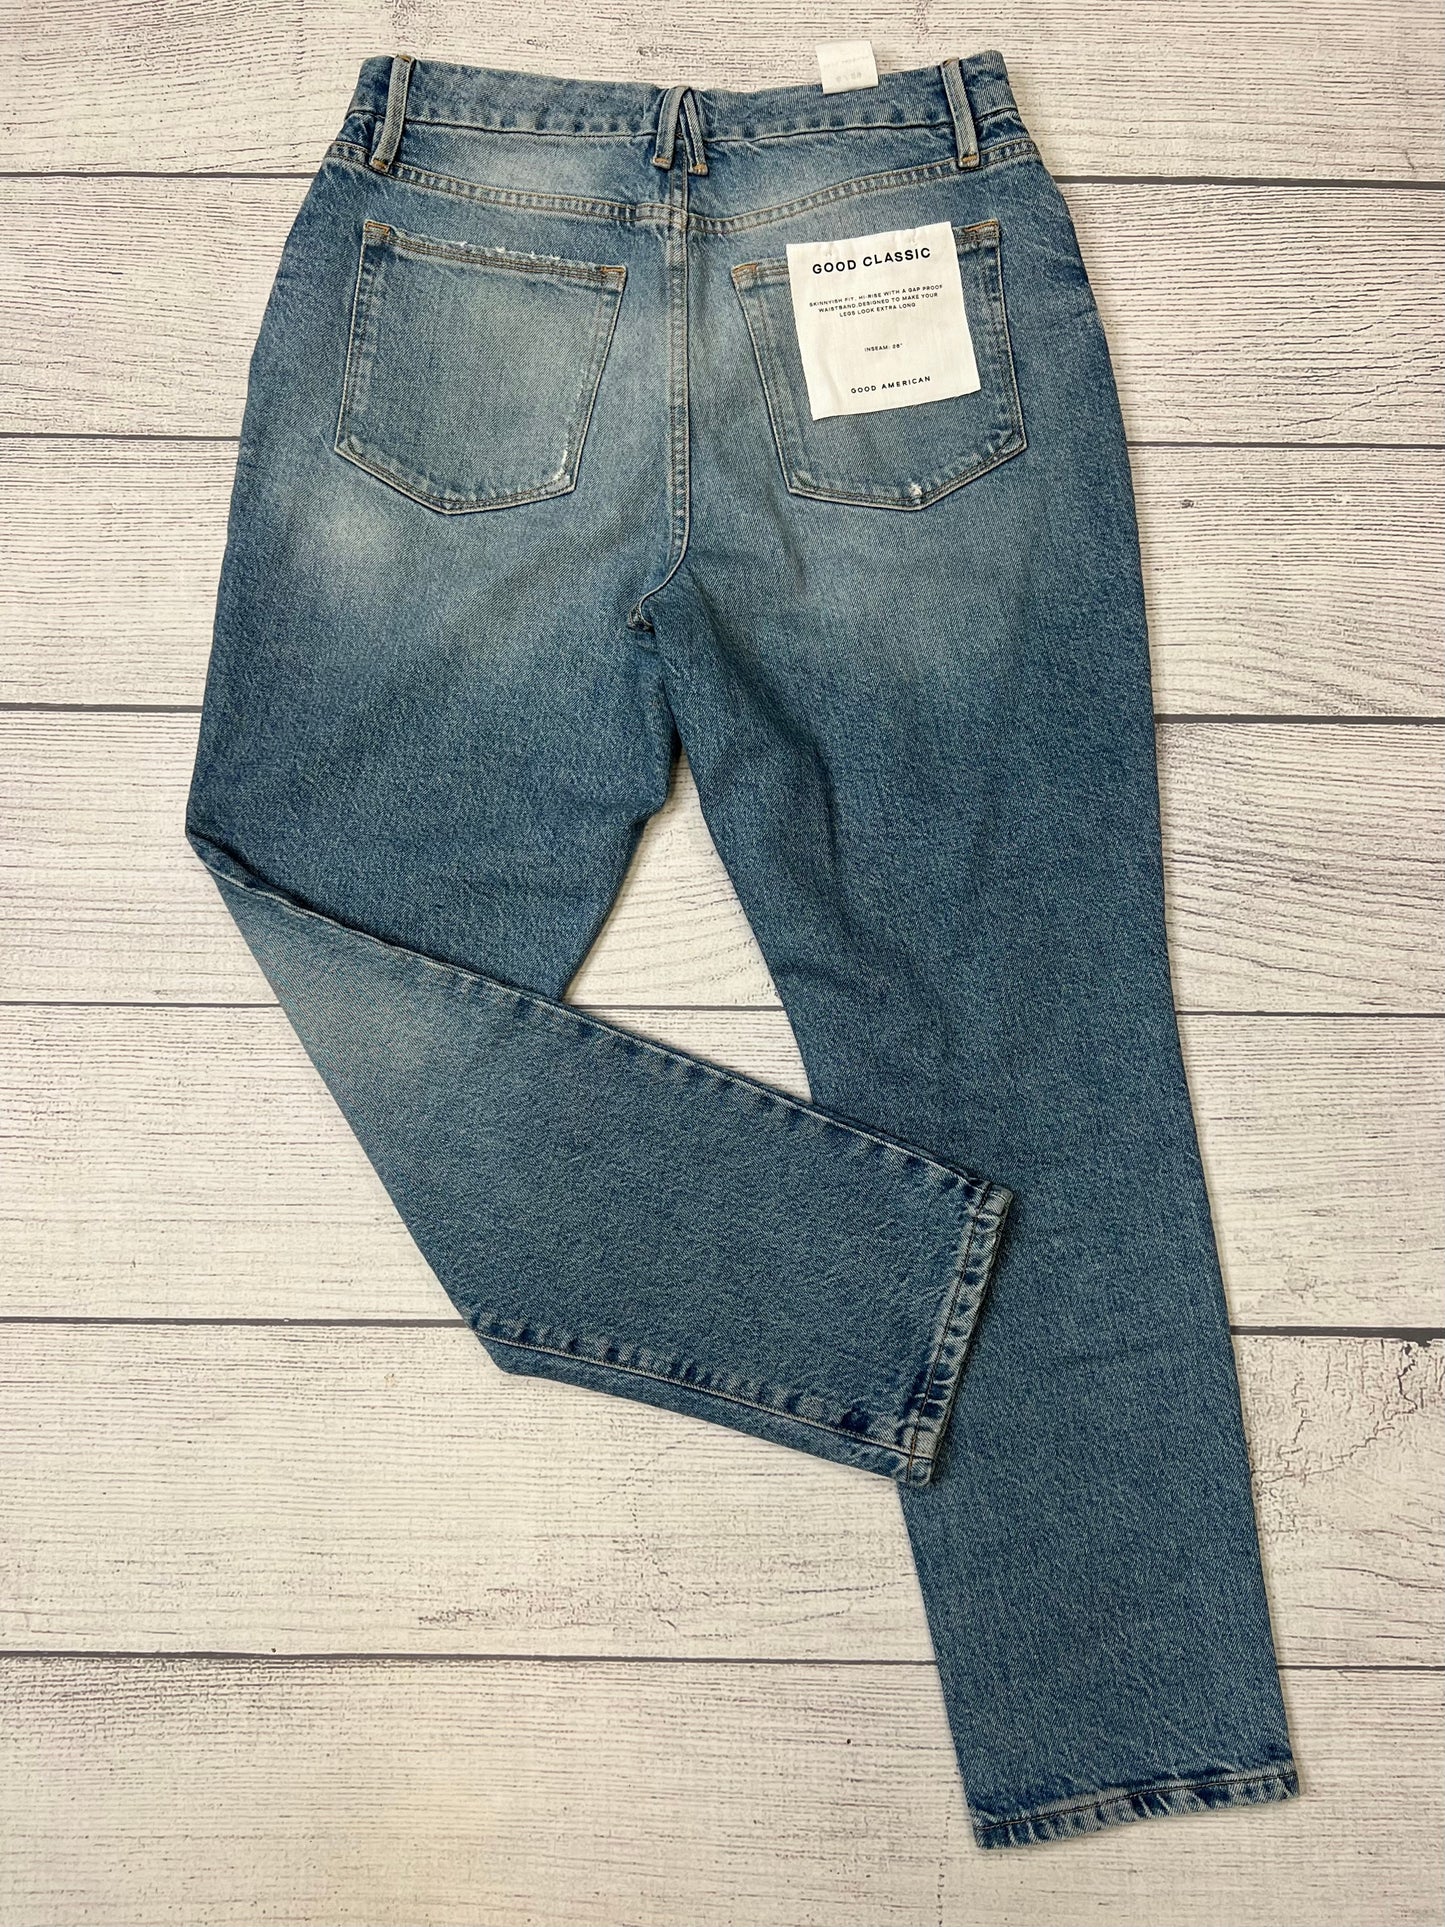 Jeans Designer By Good American  Size: 8